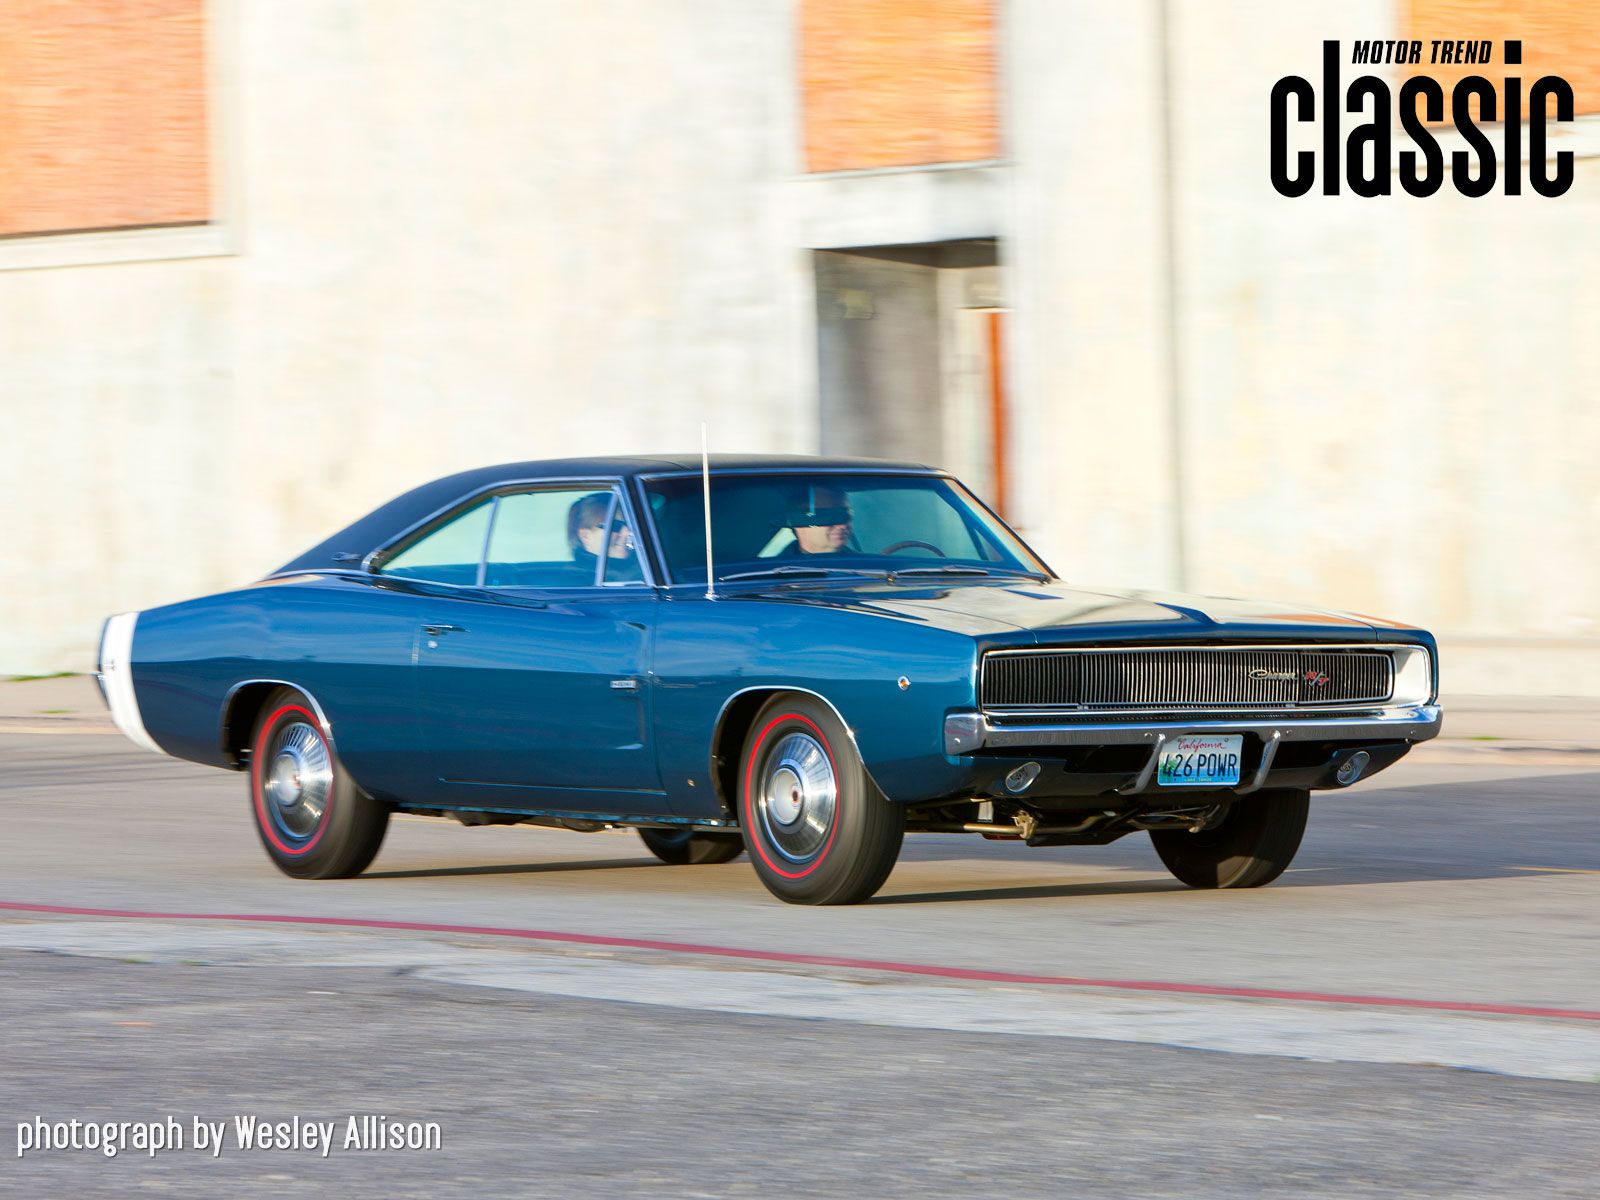 1968 Dodge Charger Rt 426 Hemi Gallery Motor Trend Hd Wallpapers